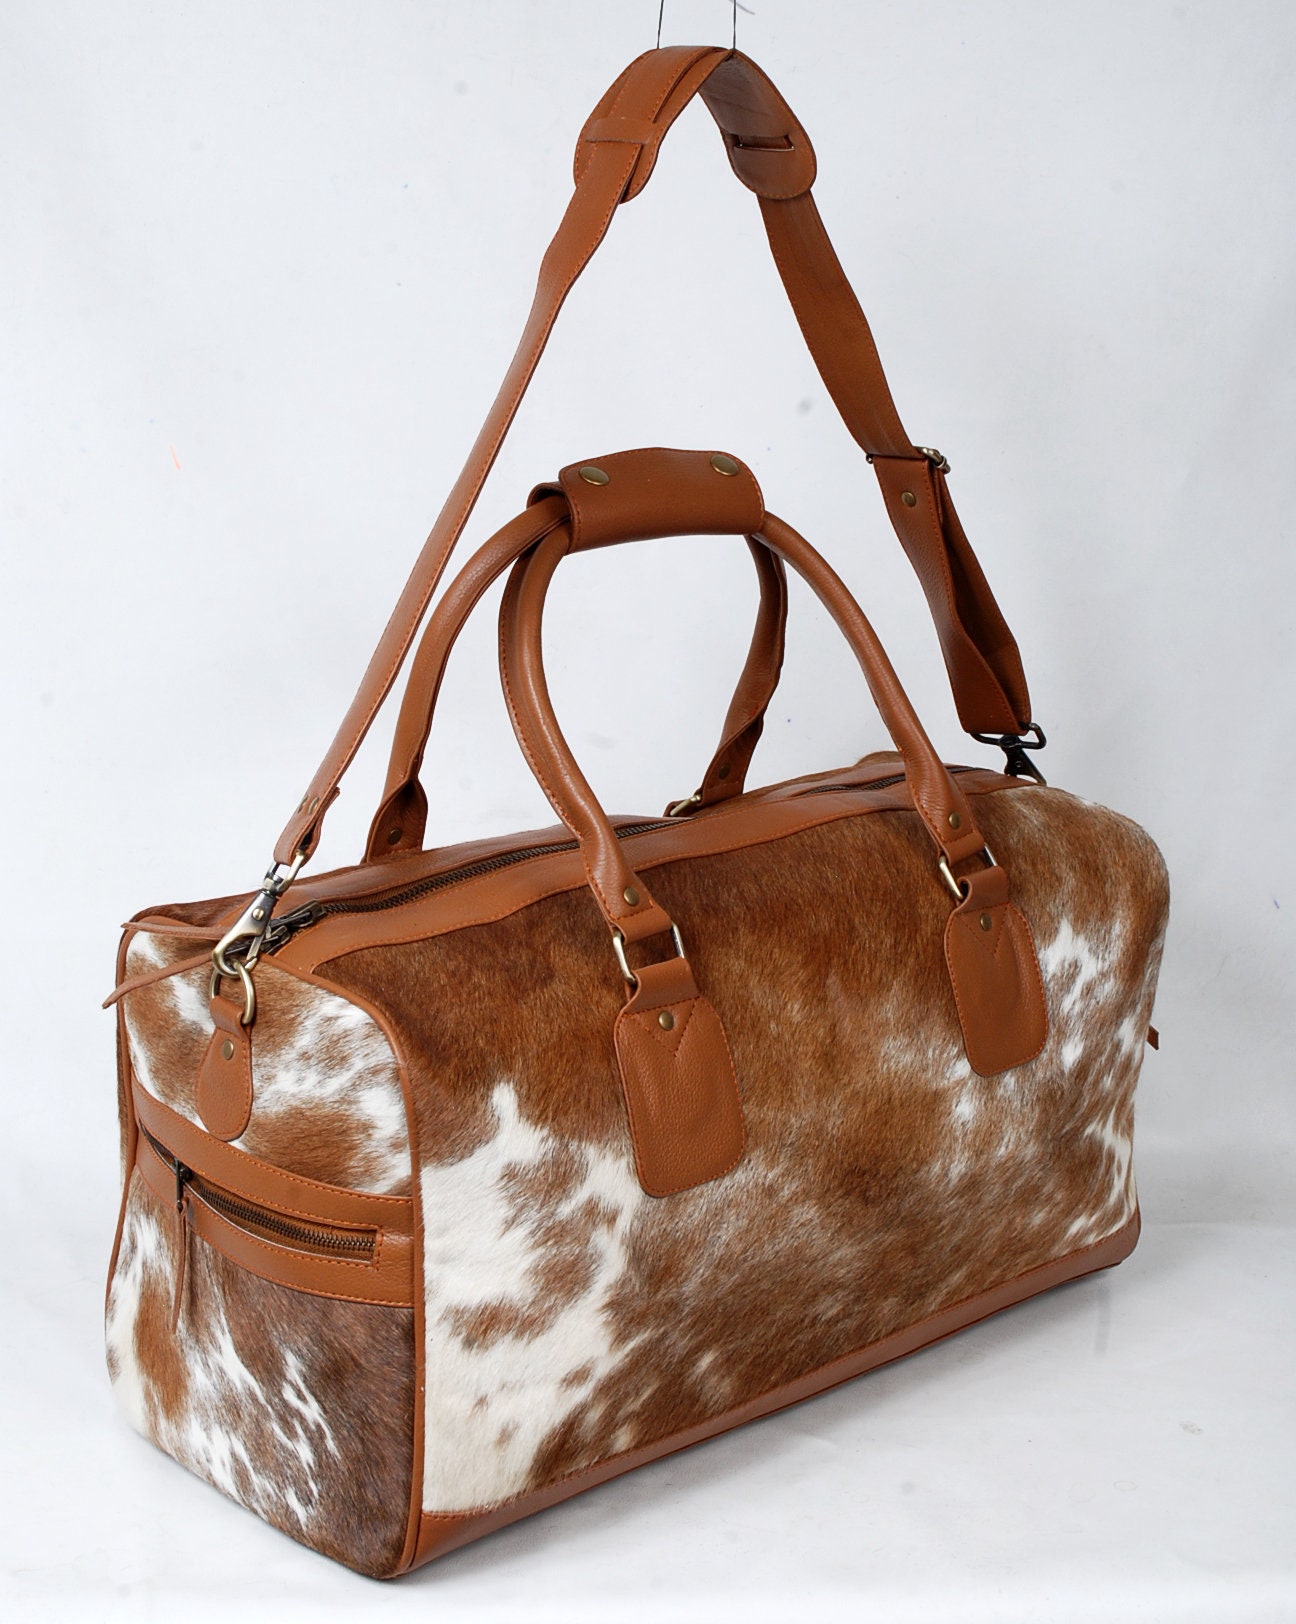 Cowhide Leather Duffel Bag Cow hide Hair on Tricolor Spotted Duffle Bag Large cowhide Weekender Bag Cowhide Duffle Holdall Travel Bag Tassen & portemonnees Bagage & Reizen Duffelbags 